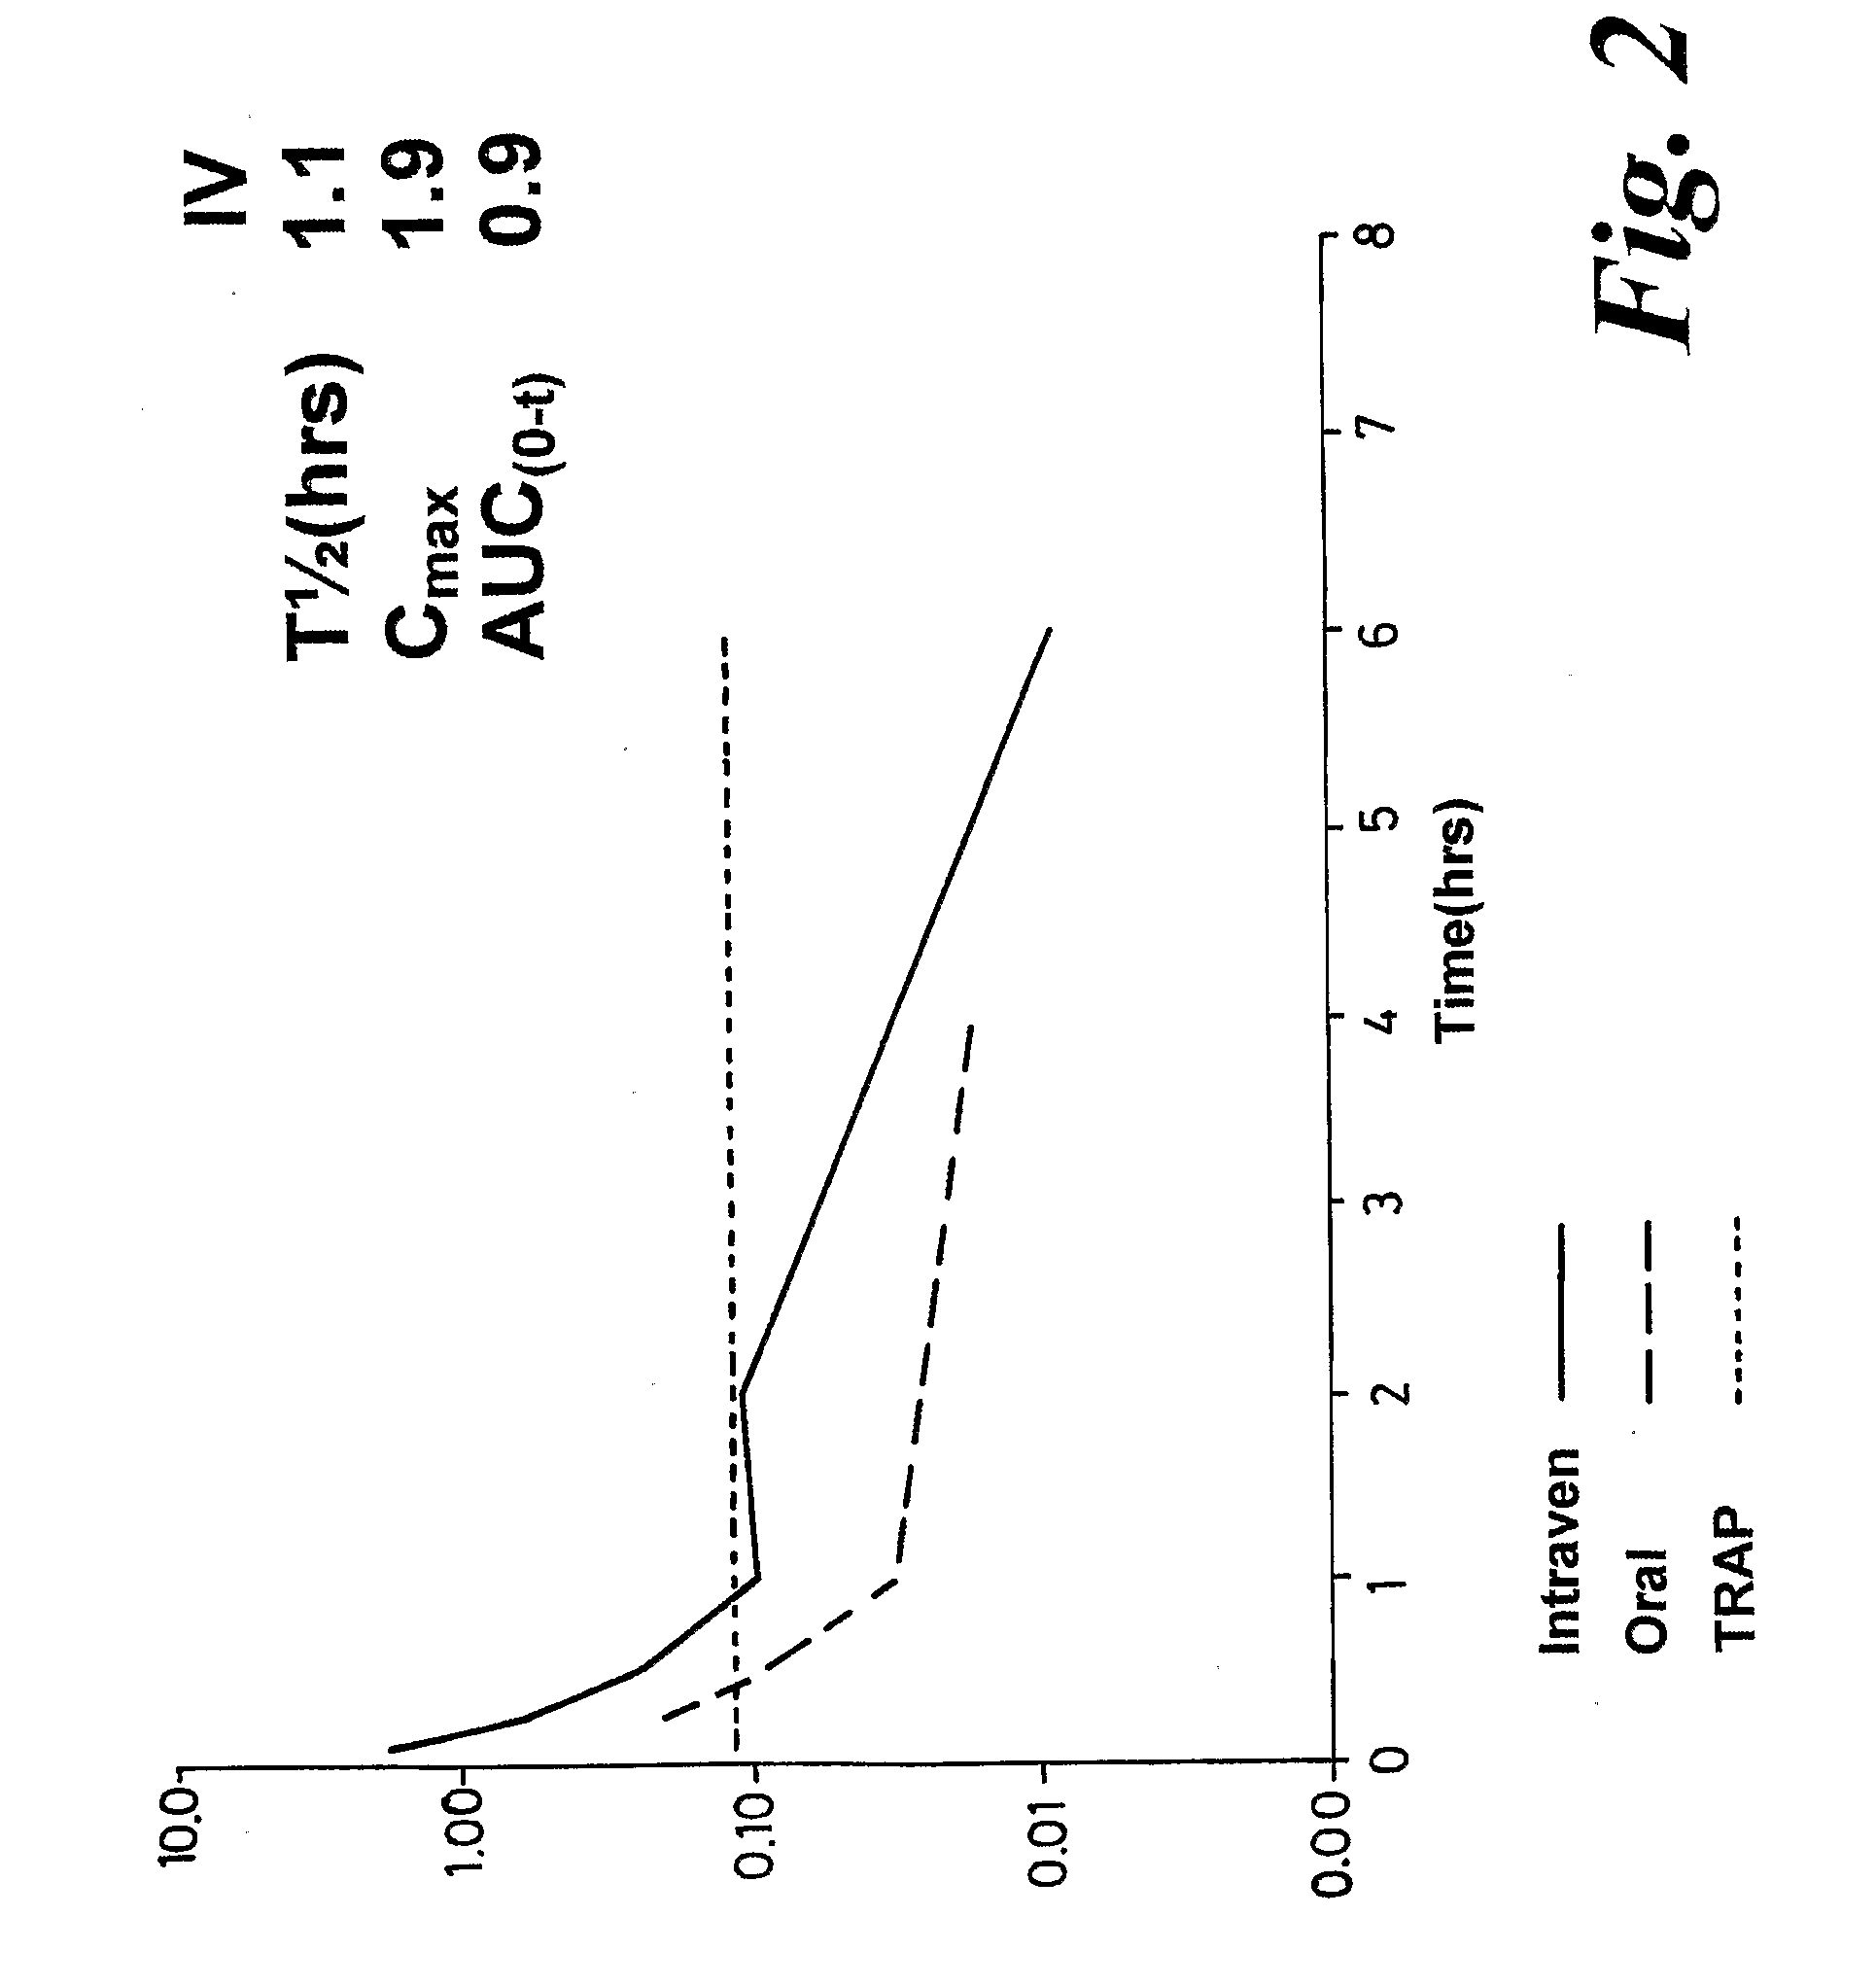 Cancer Treatment Using Specific 3,6,9-Substituted Acridines